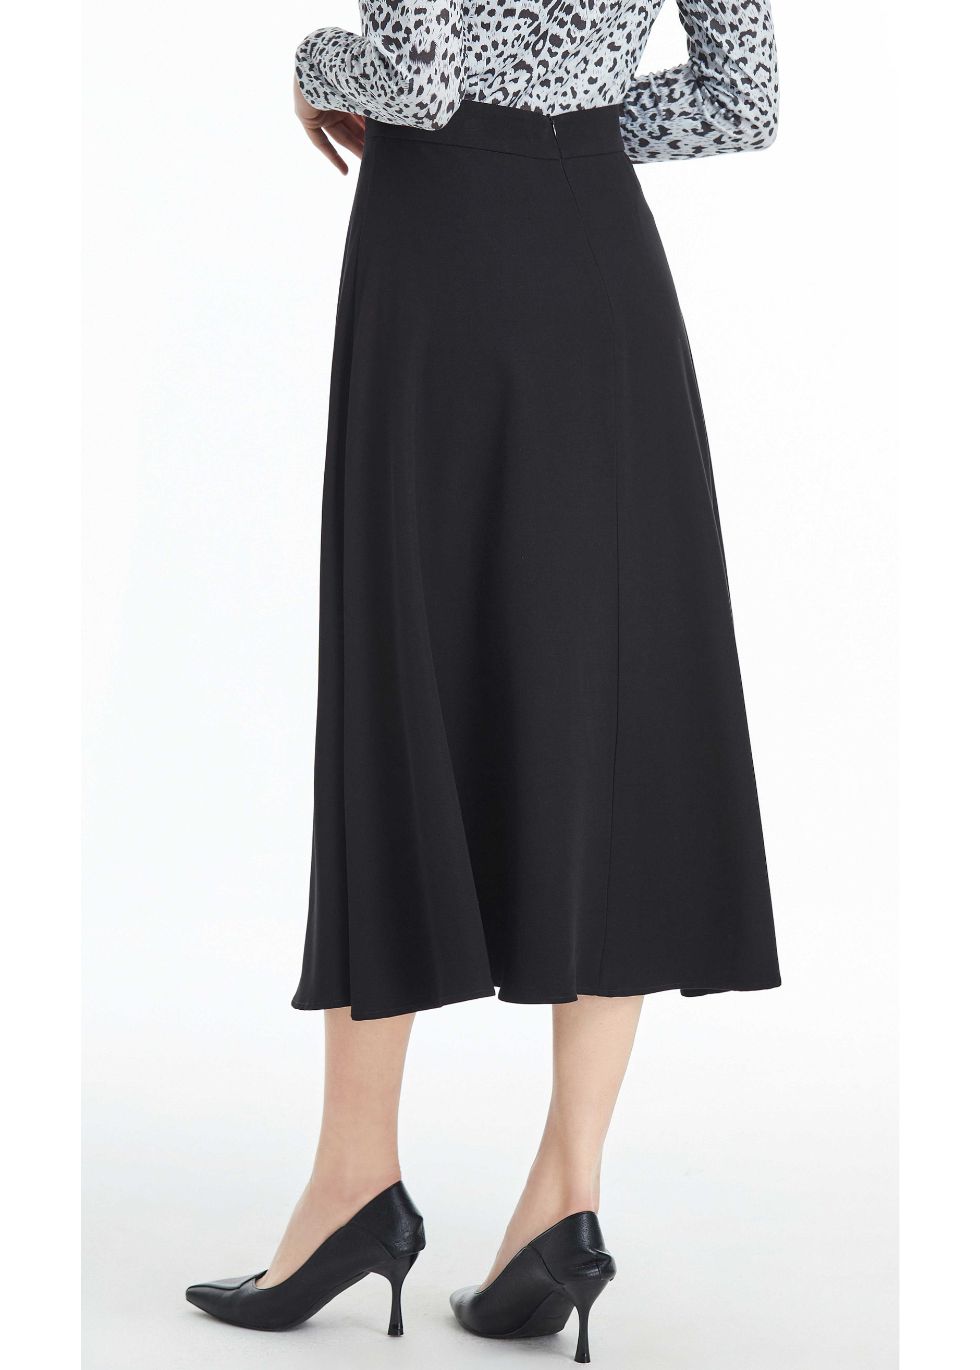 Fully Lined Black Midi Skirt with Front Button Detail - seilerlanguageservices